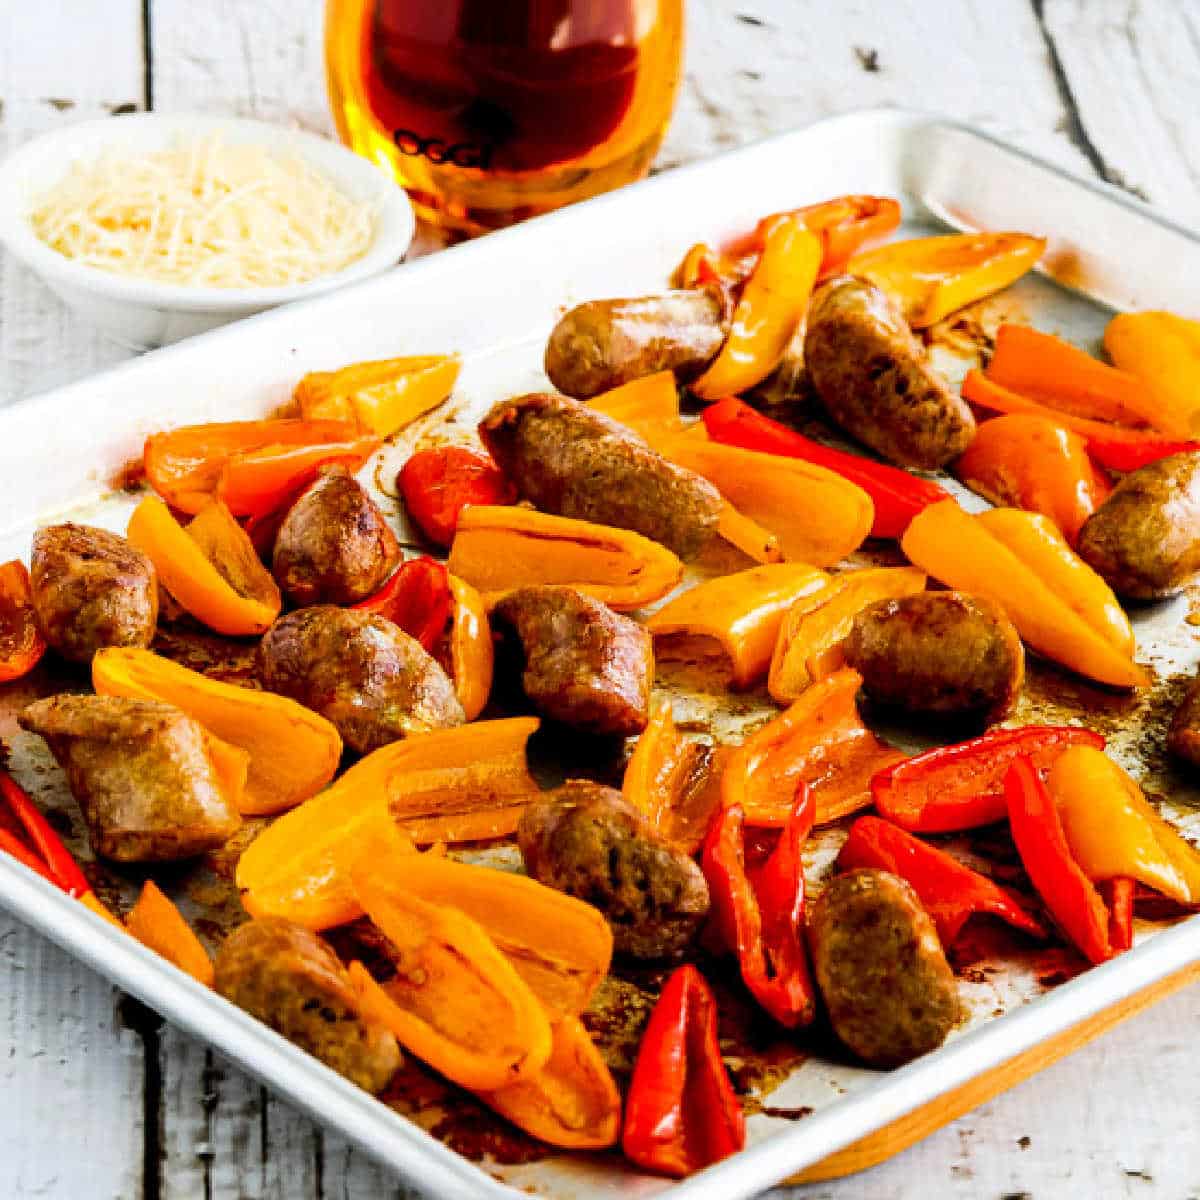 Square image for Roasted Italian Sausage and Mini Peppers Sheet Pan Meal shown on baking sheet.